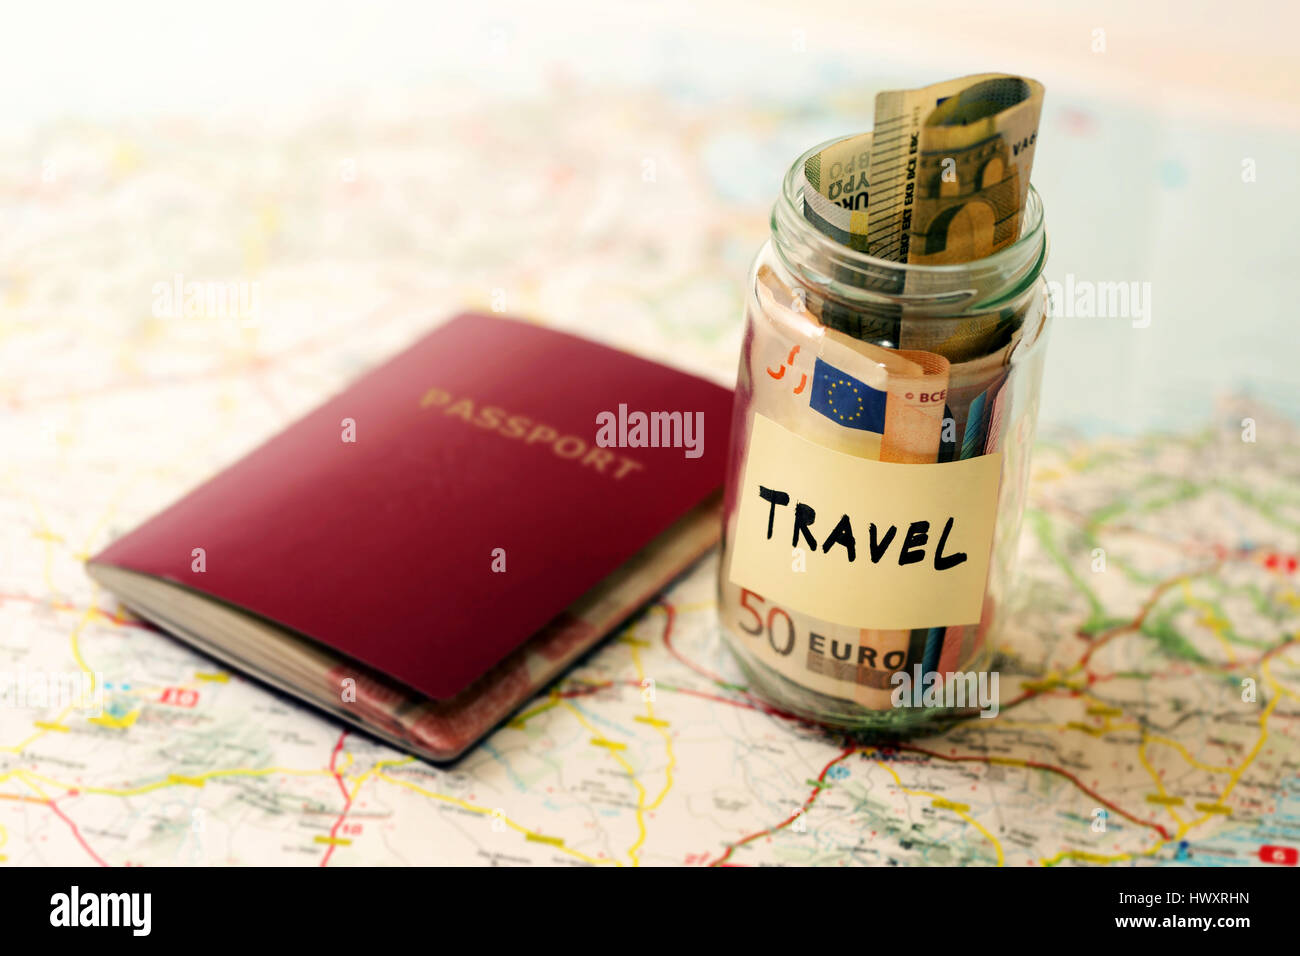 travel budget concept, money savings and passport on a map Stock Photo